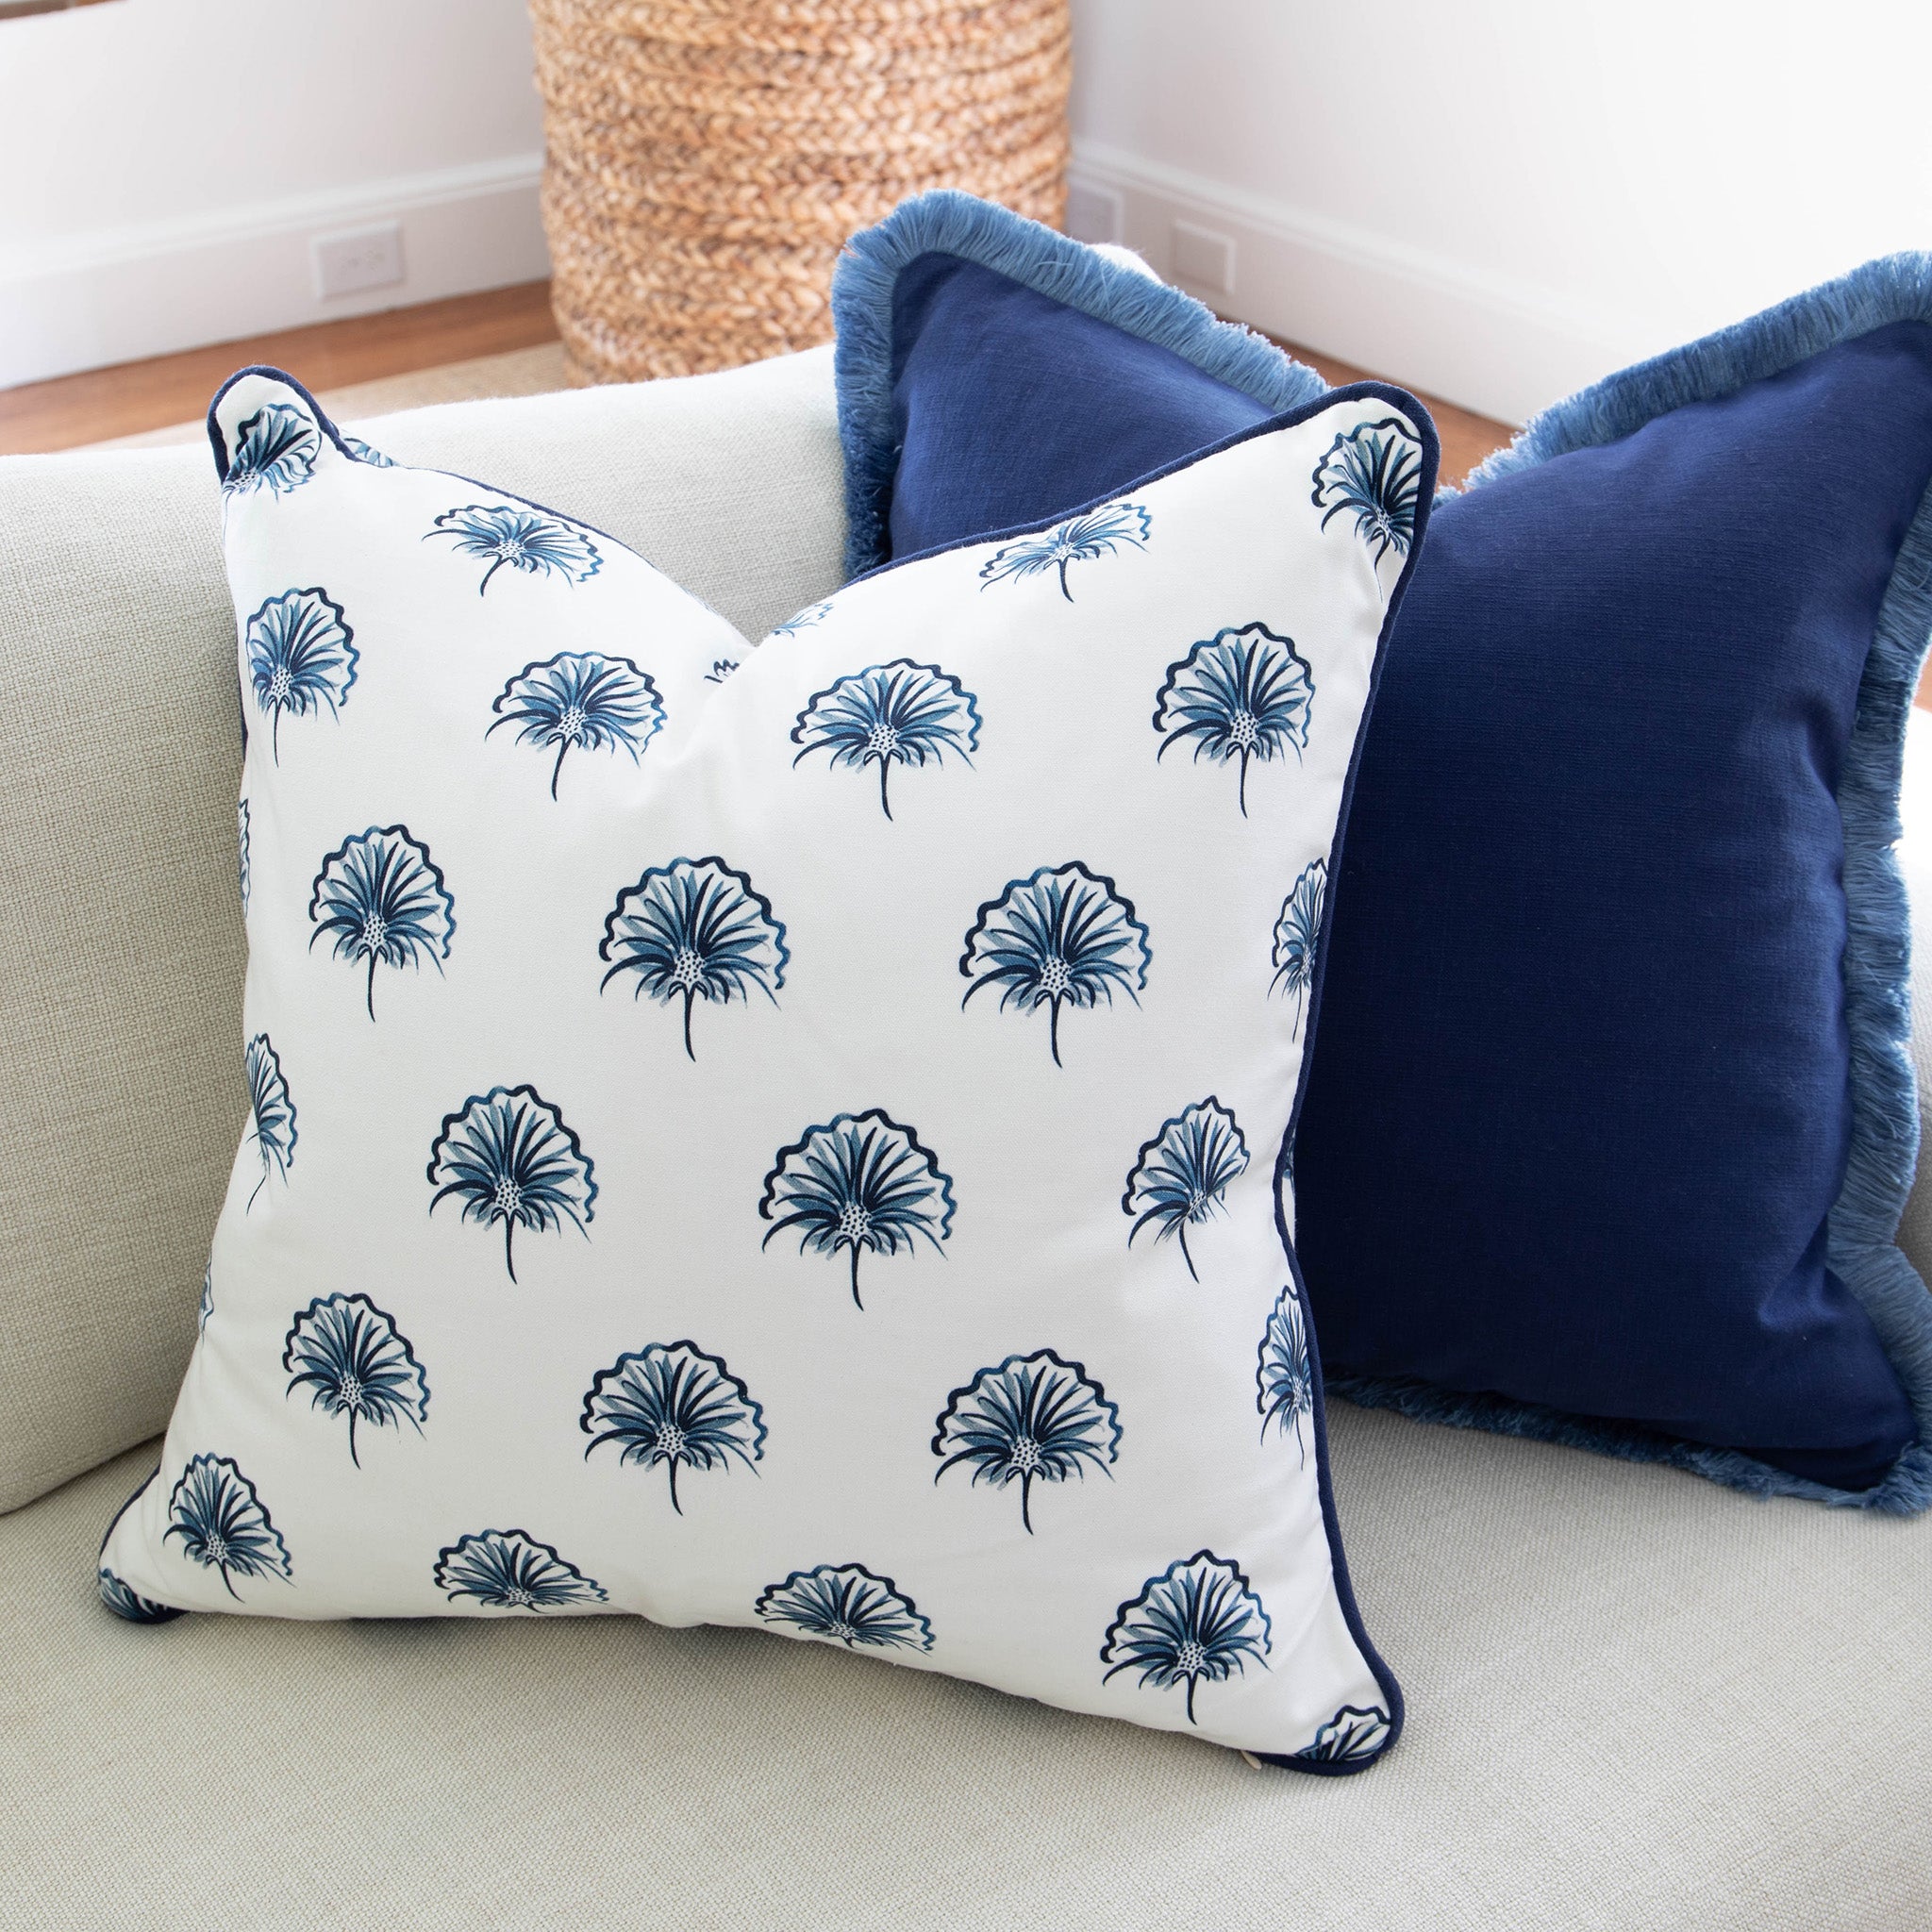 Floral navy custom pillow and navy blue custom pillow styled on a white couch